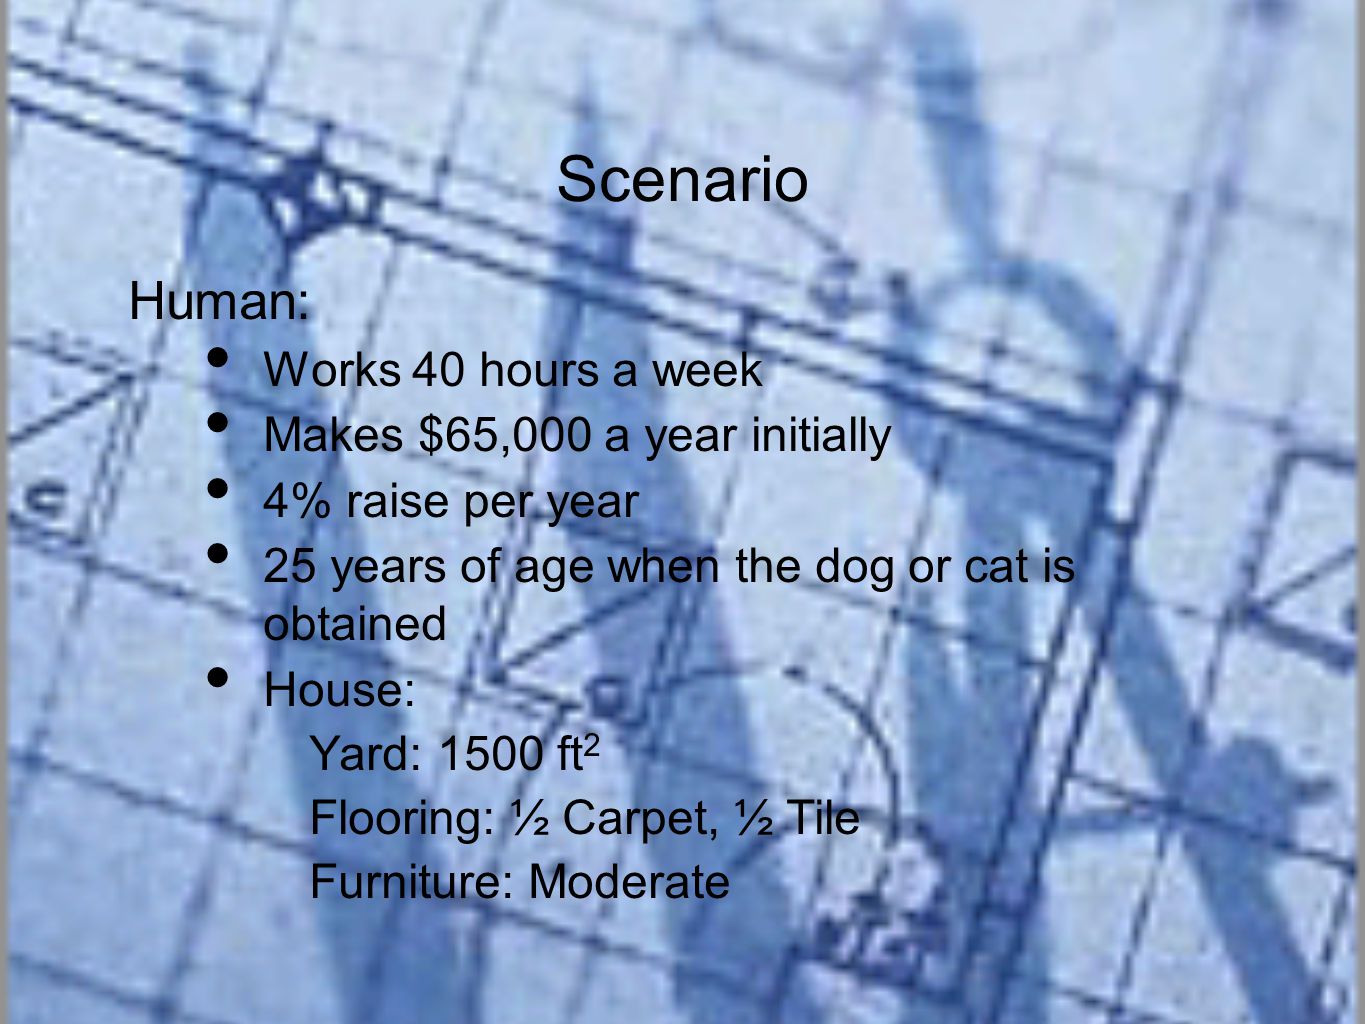 Scenario Human: Works 40 hours a week Makes $65,000 a year initially 4% raise per year 25 years of age when the dog or cat is obtained House: Yard: 1500 ft 2 Flooring: ½ Carpet, ½ Tile Furniture: Moderate